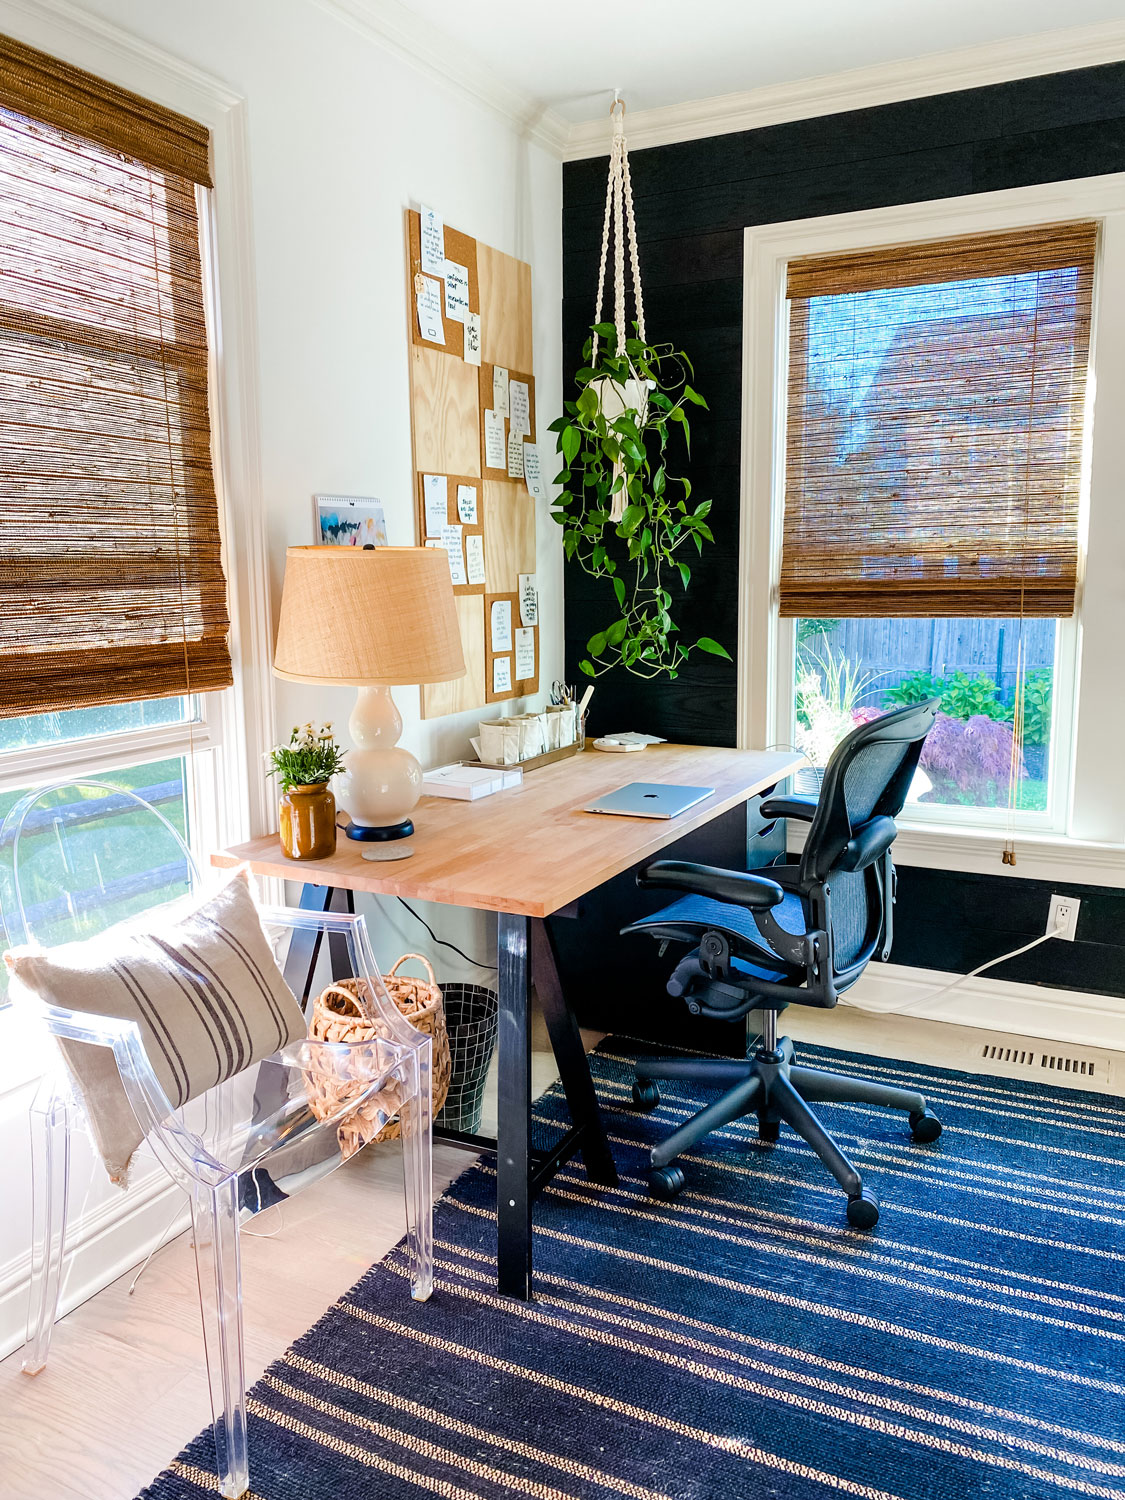 5 Ways to Create a Beautiful, Professional Home Office that's Sure to  Impress!